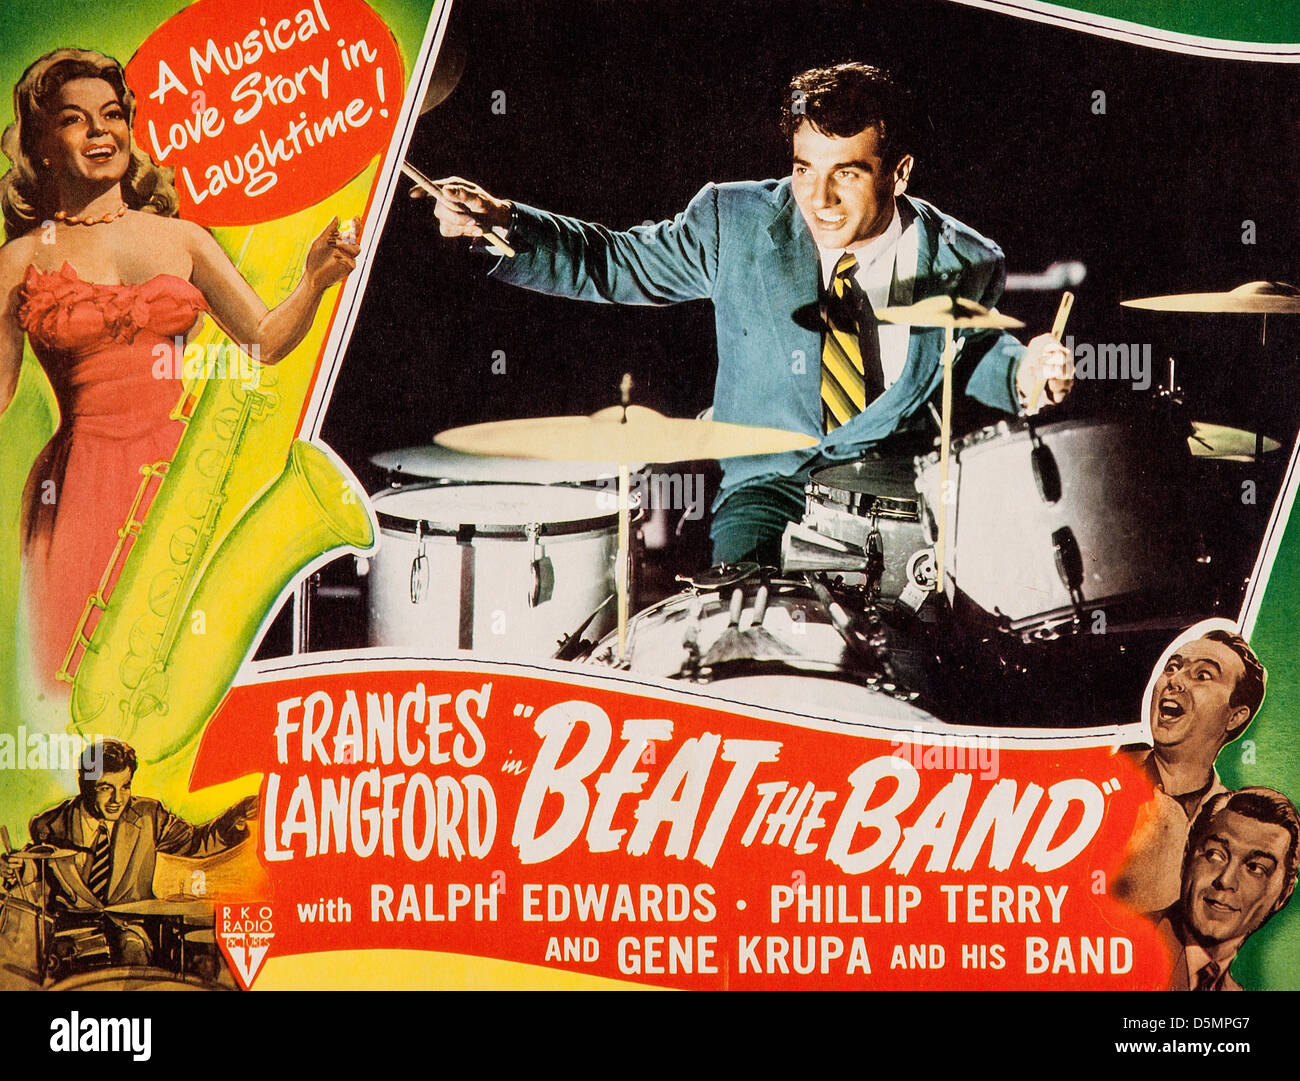 Norm erosion Ambient FRANCES LANGFORD, GENE KRUPA POSTER, BEAT THE BAND, 1947 Stock Photo - Alamy